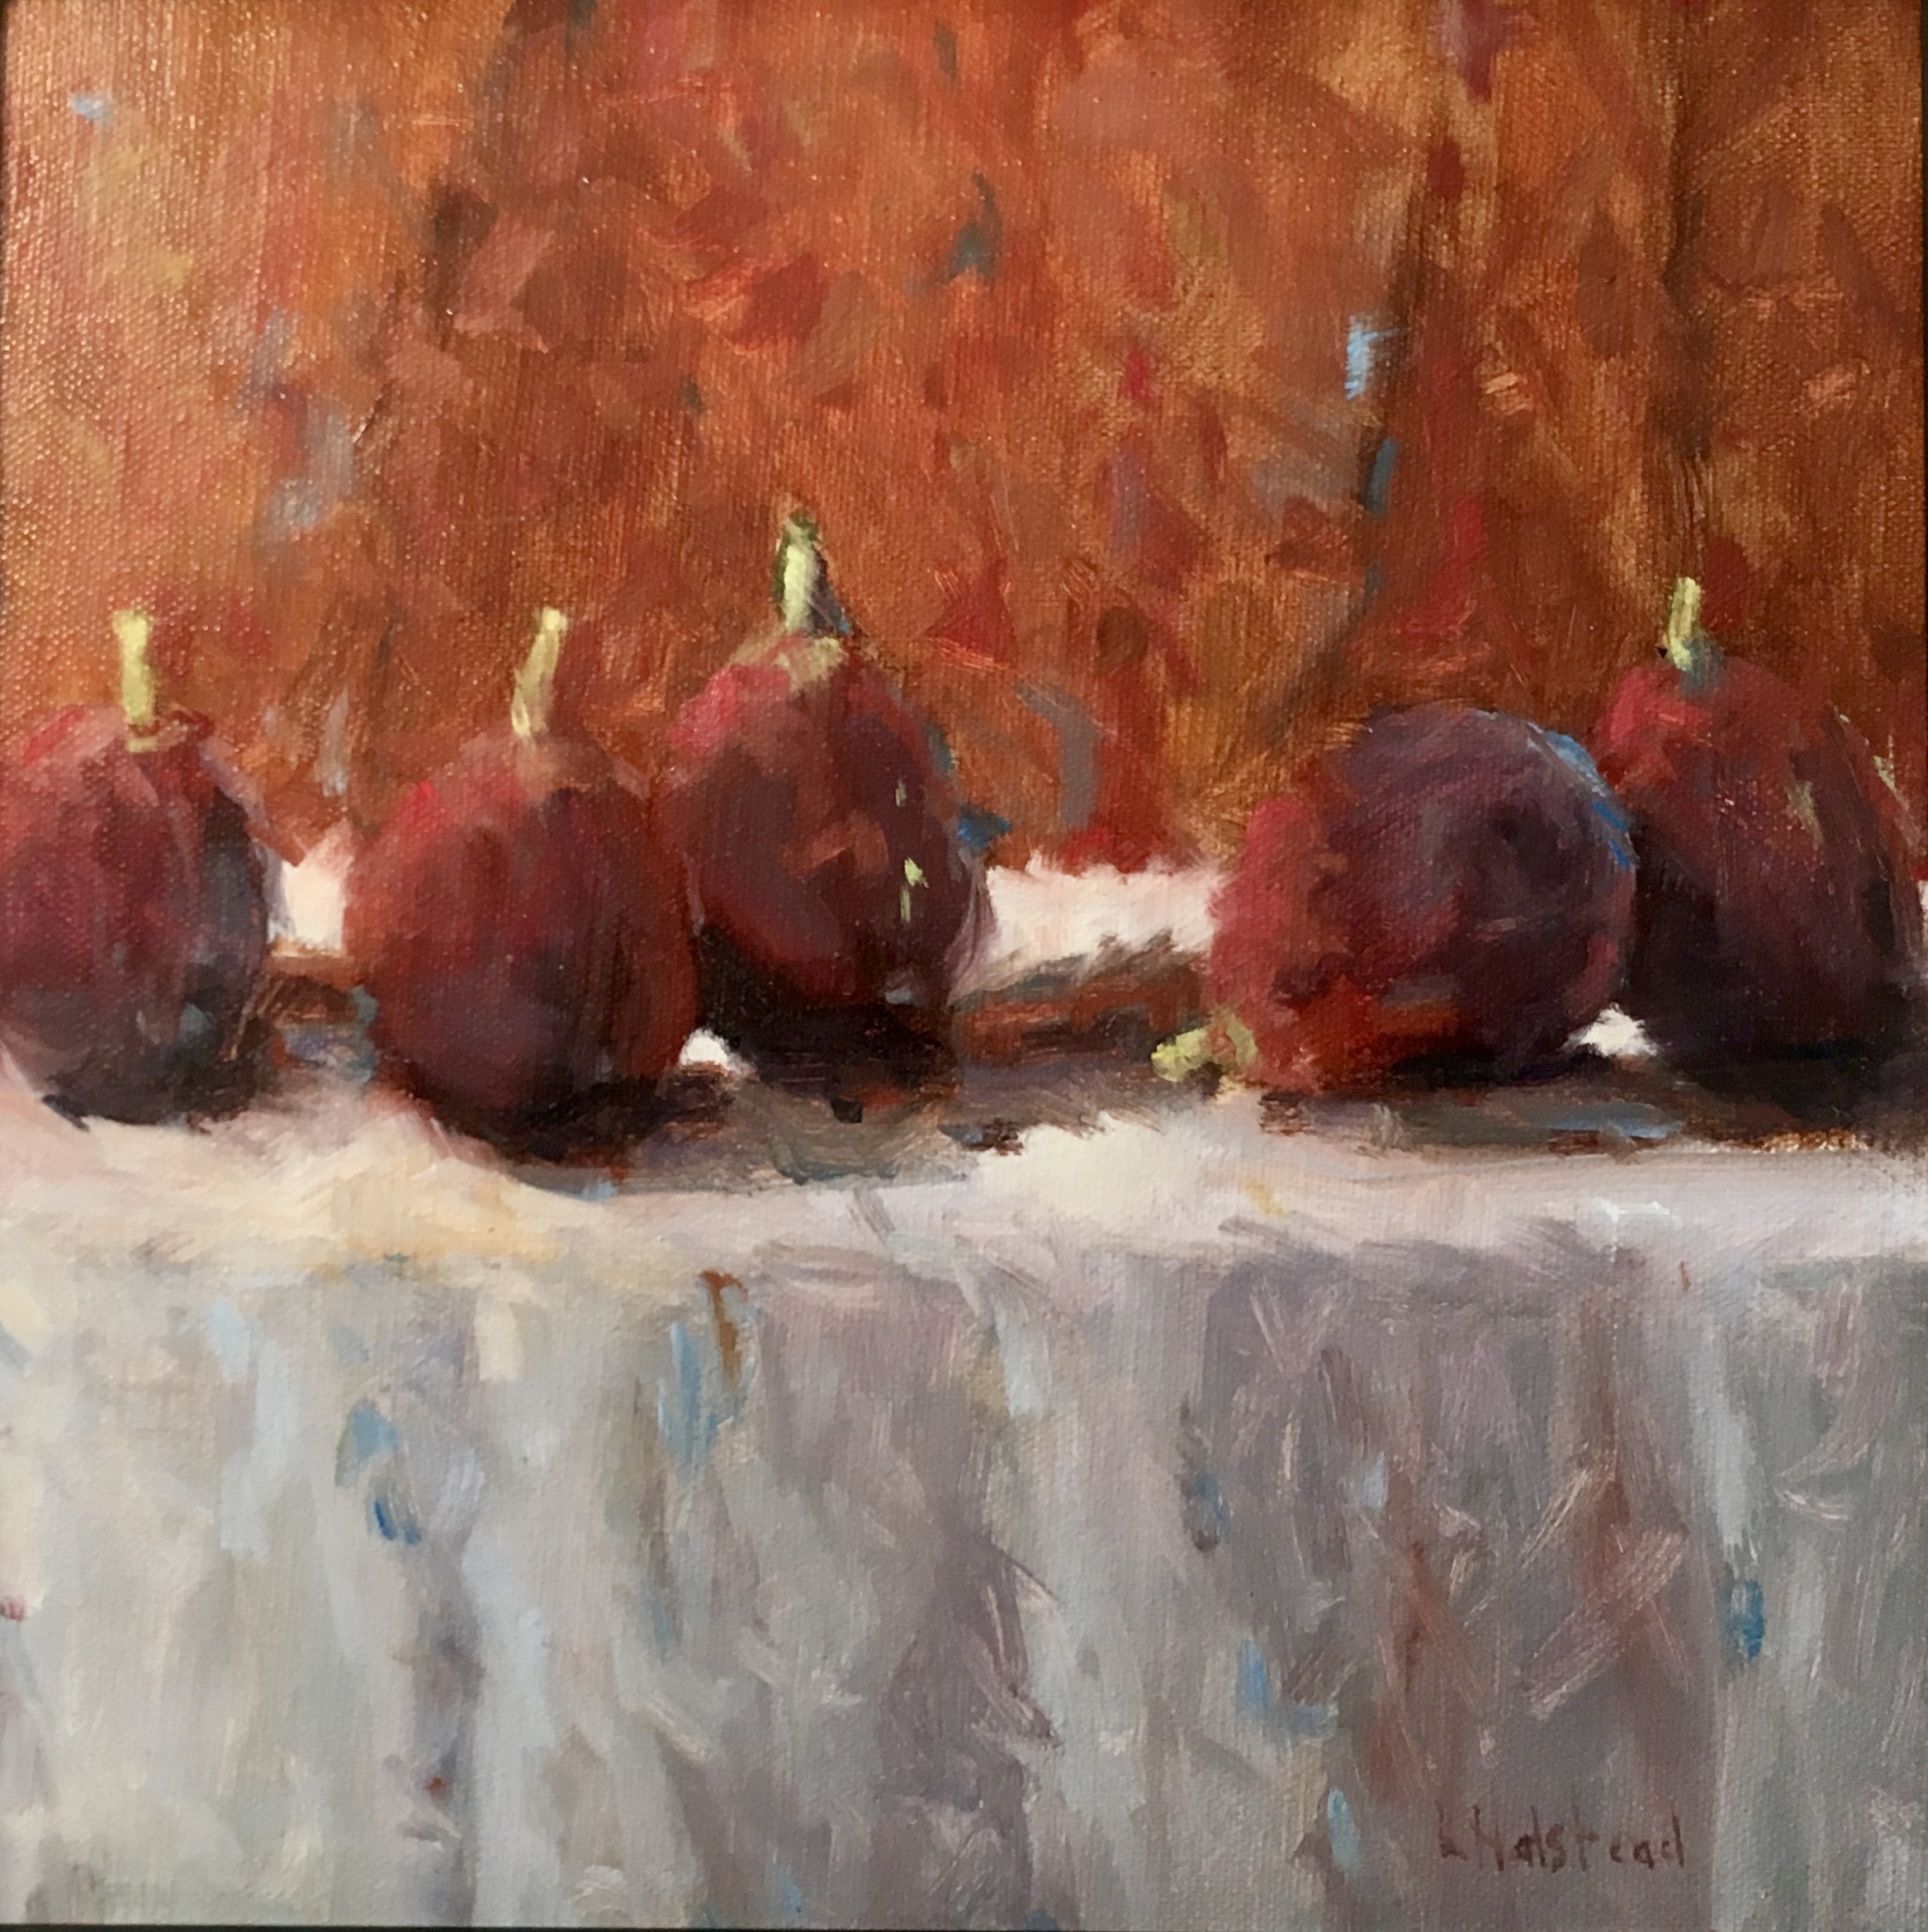 Venetian and Figs, Oil on Linen, 8 x 8